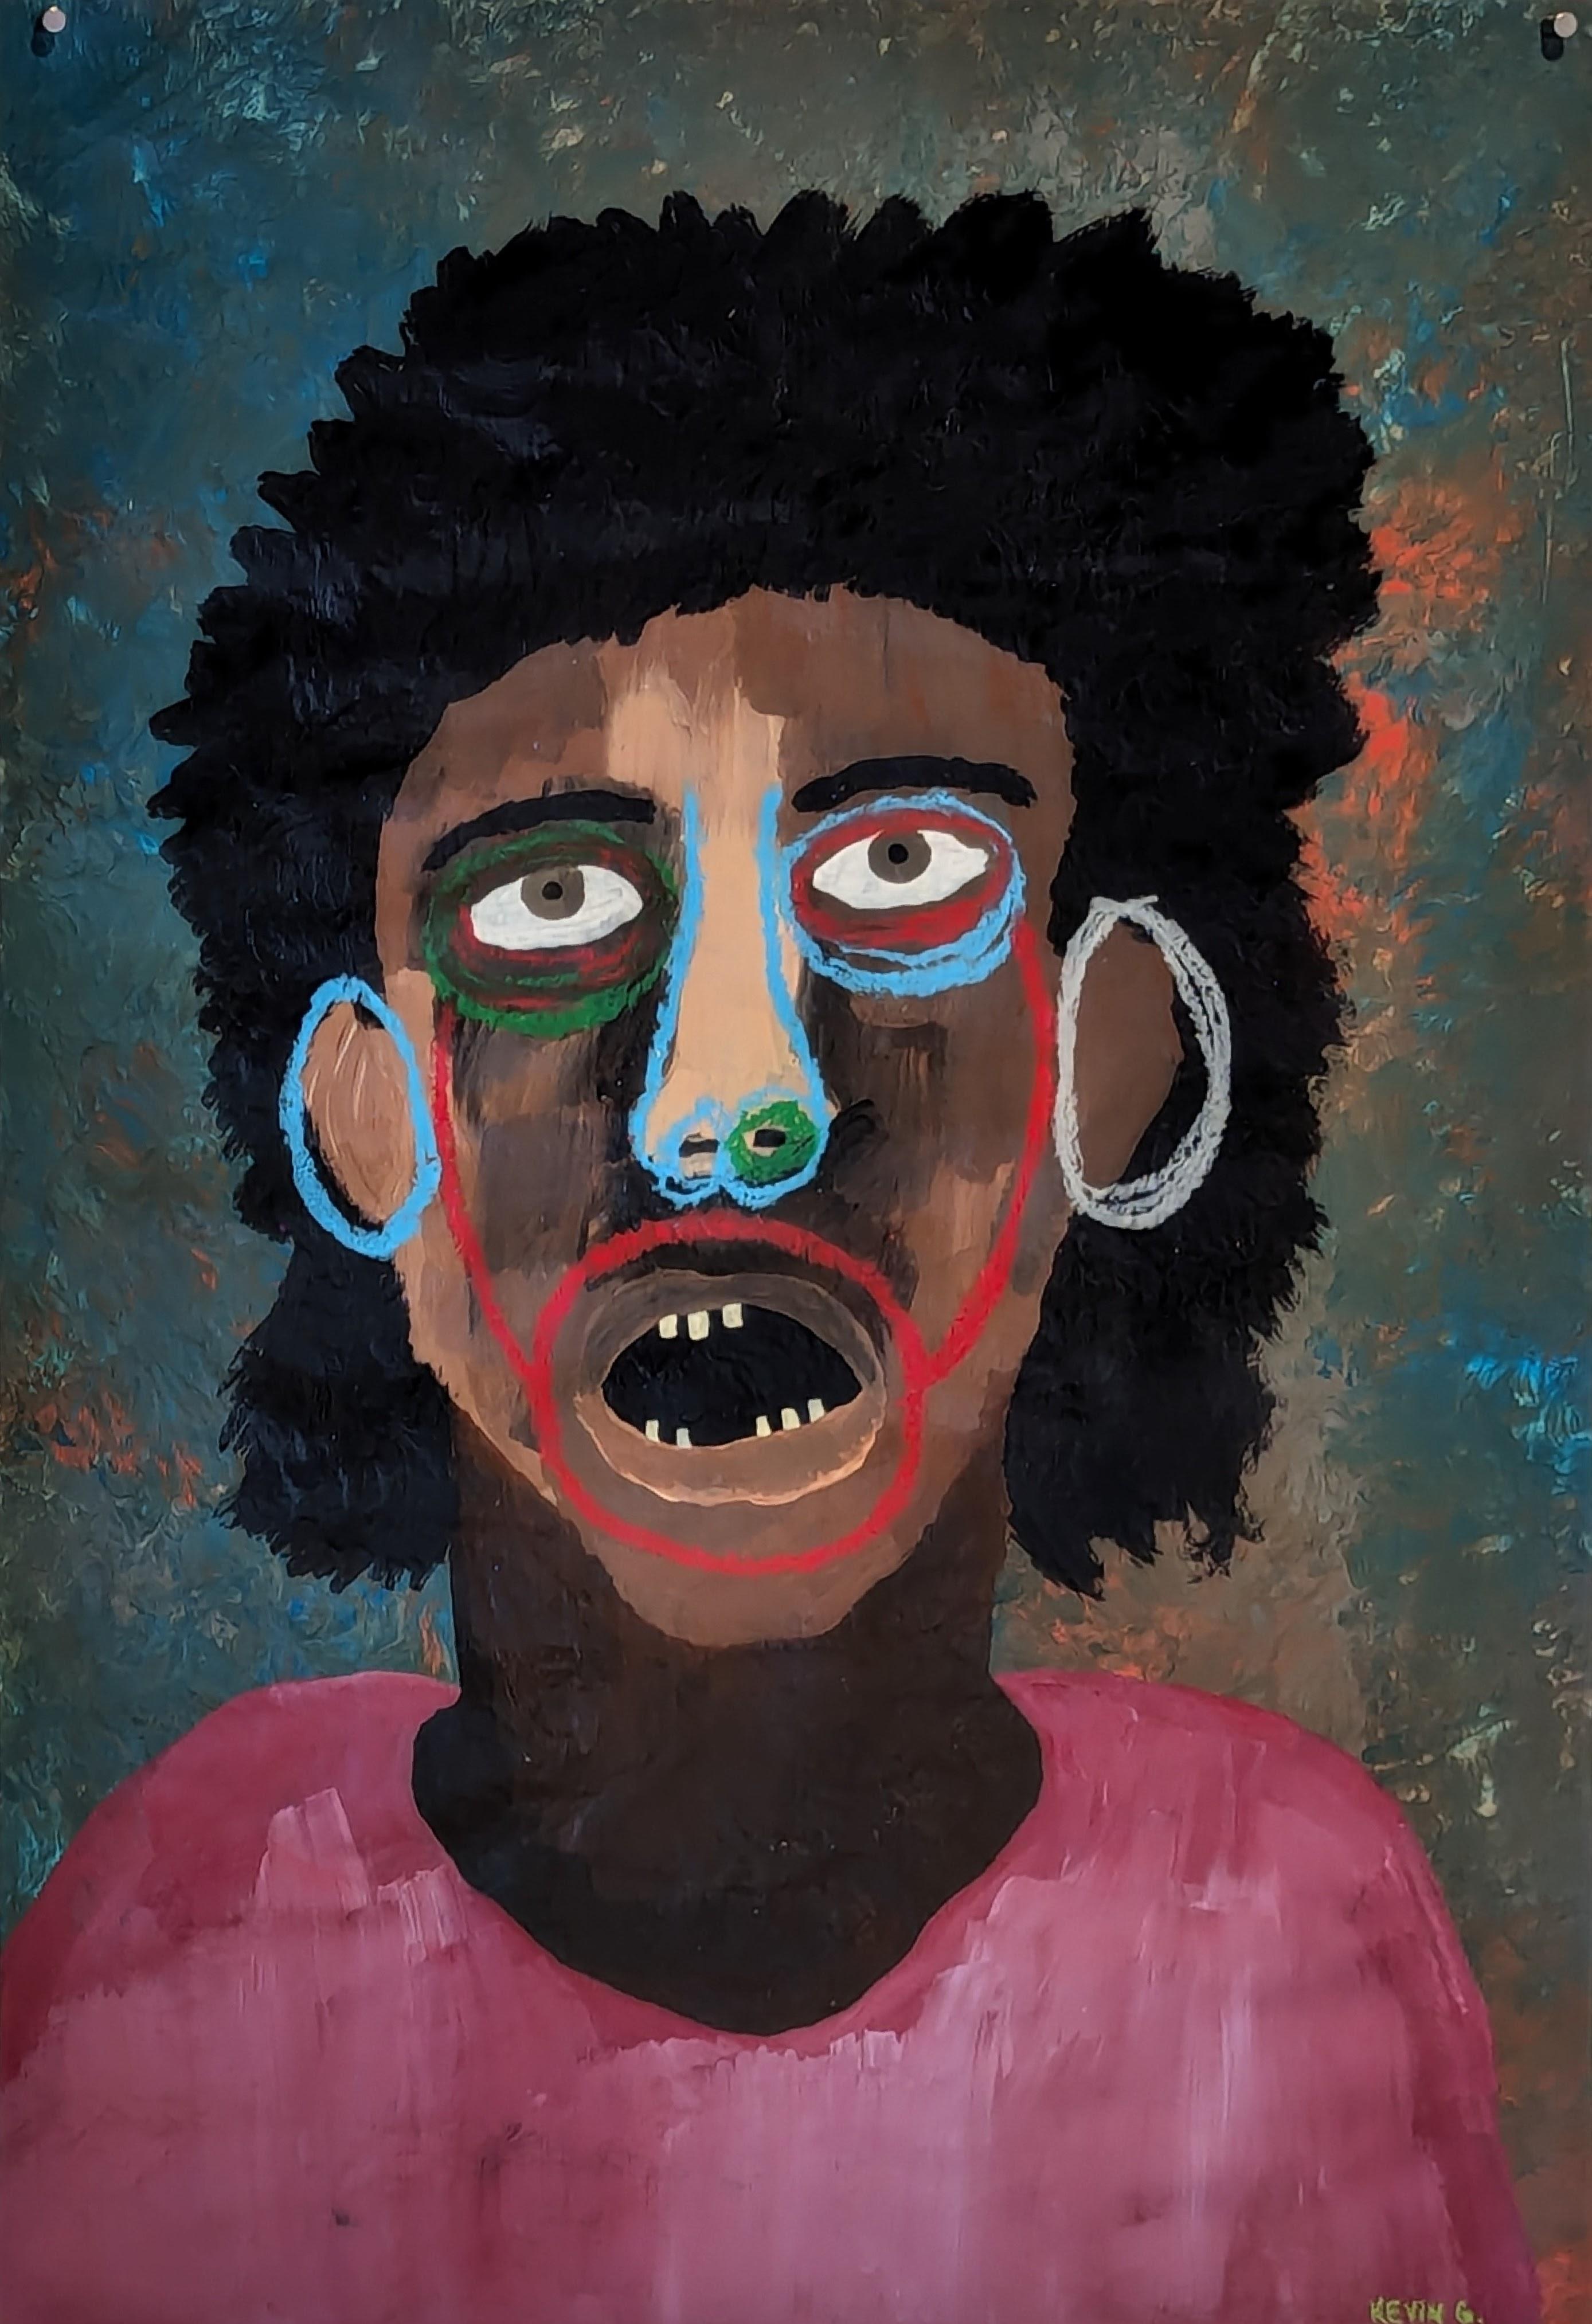 Portrait Painting Kevin Gilmore - "The Lonely Family : Jake" Contemporary Outsider Art Figurative Painting